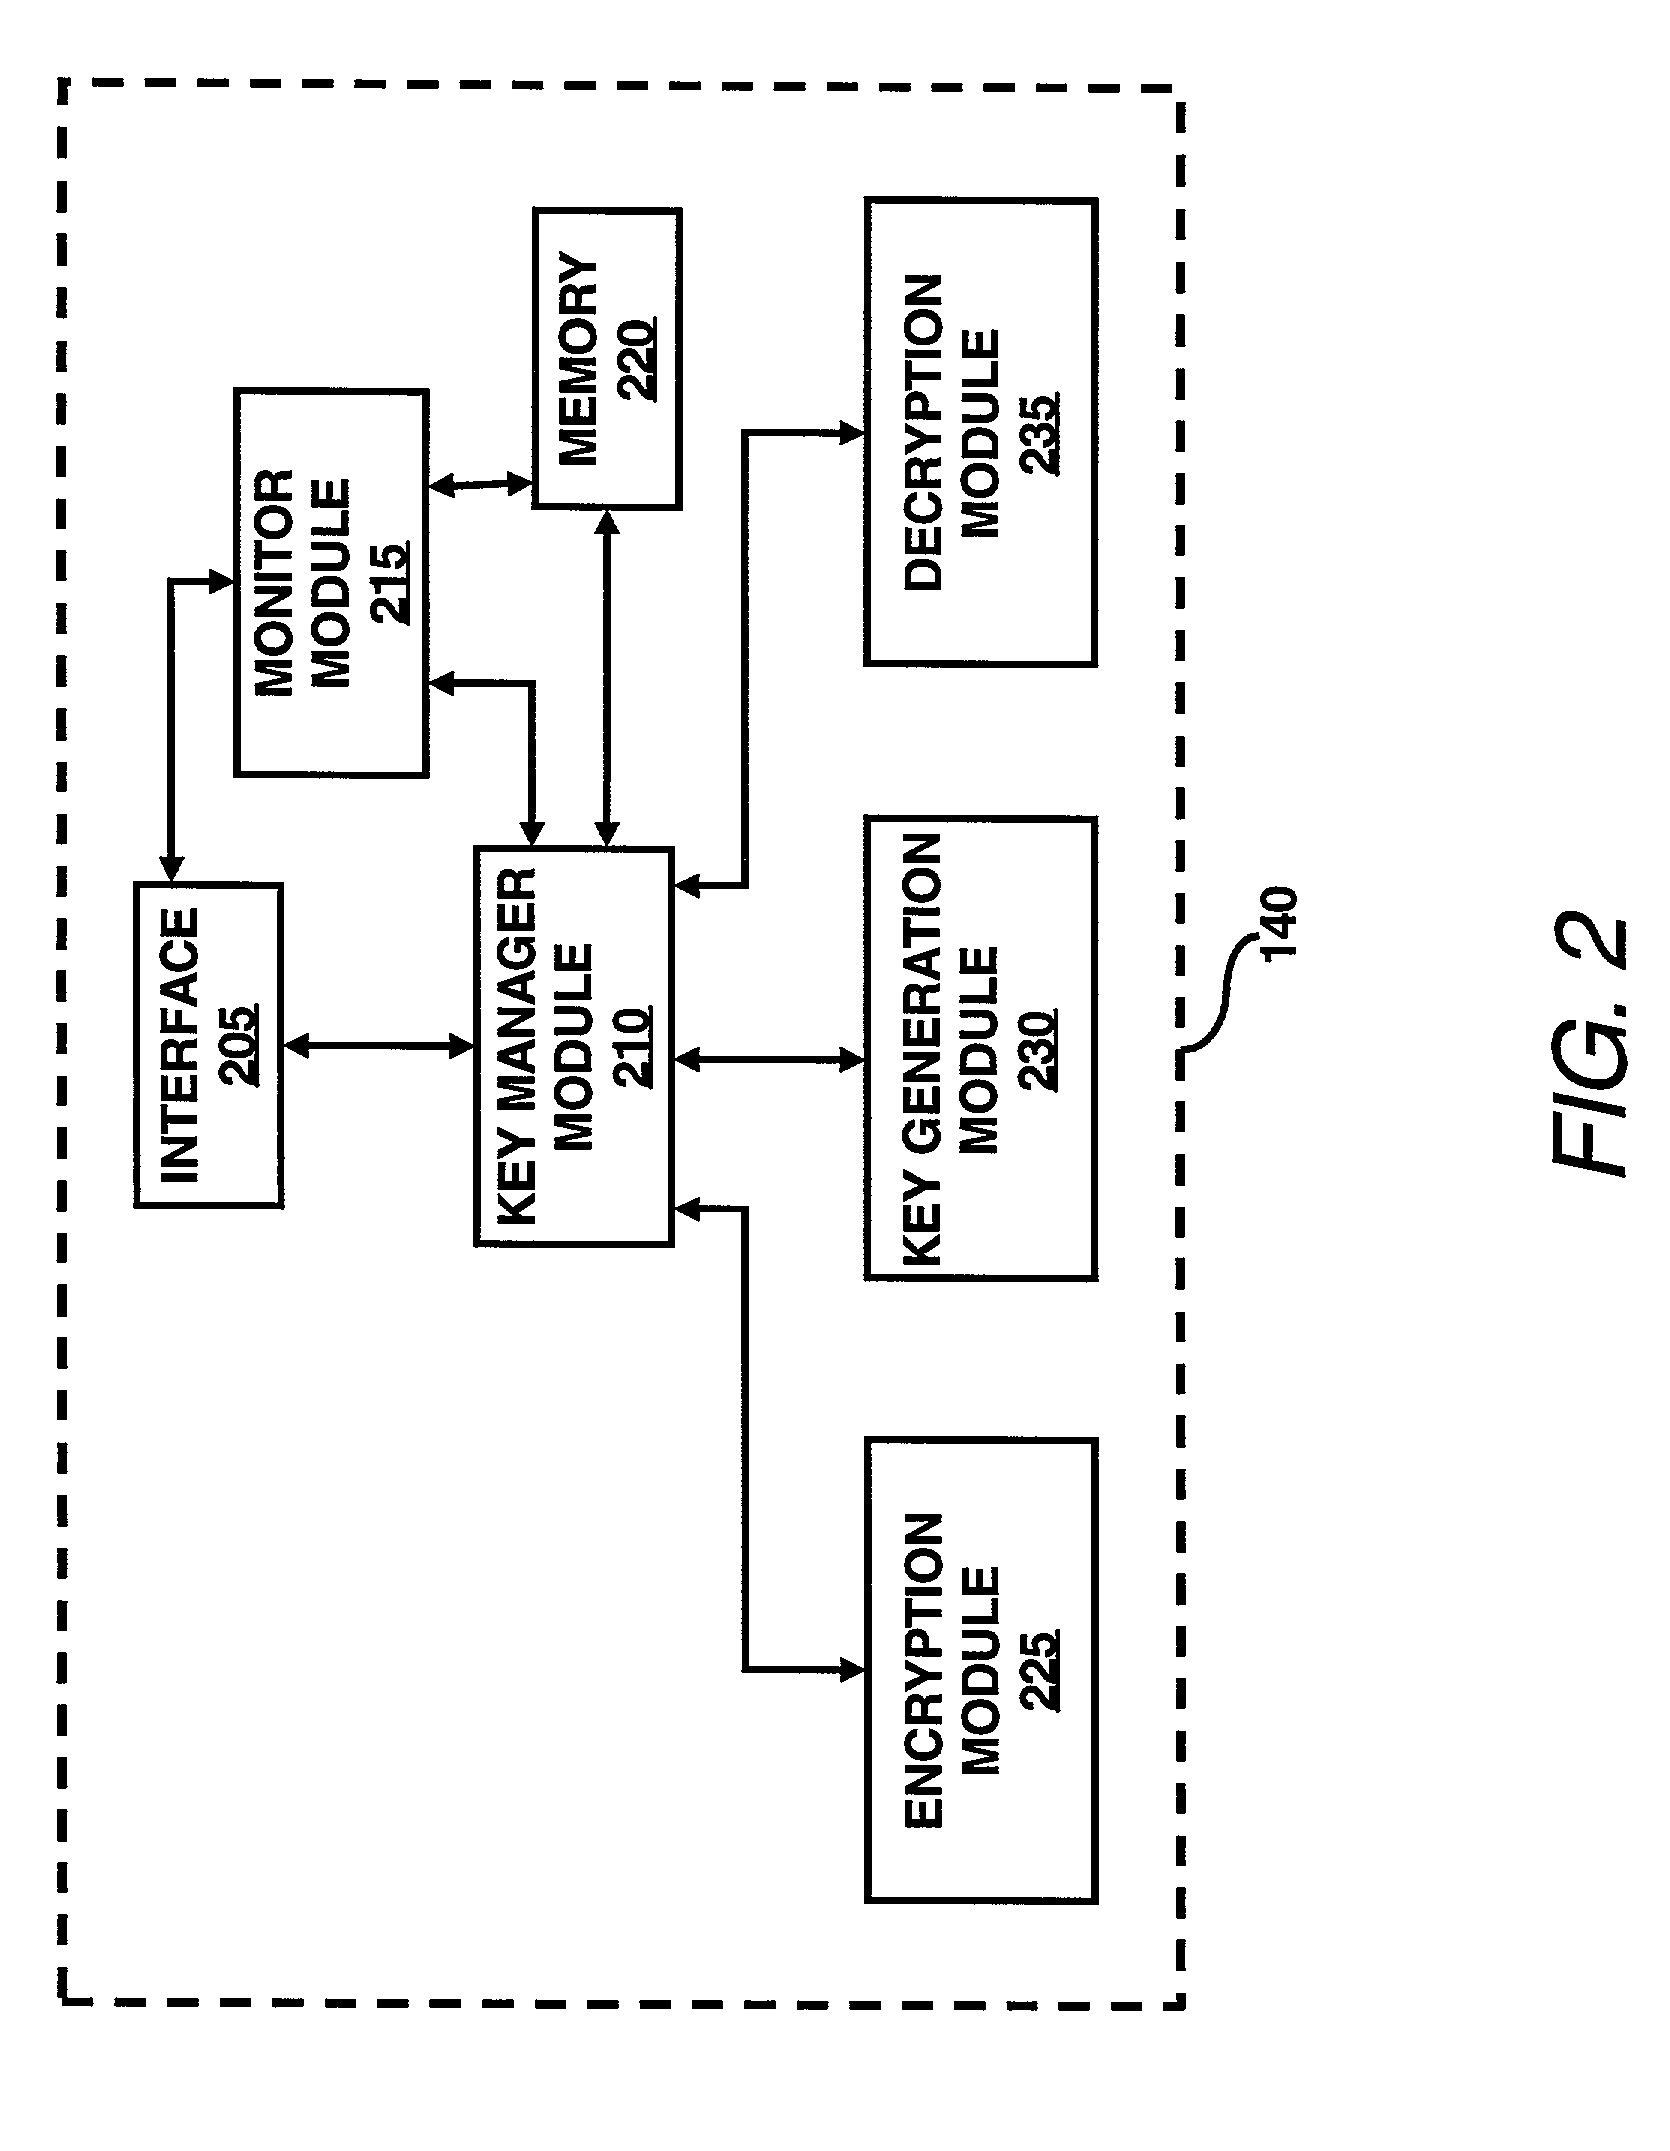 System for encrypted file storage optimization via differentiated key lengths